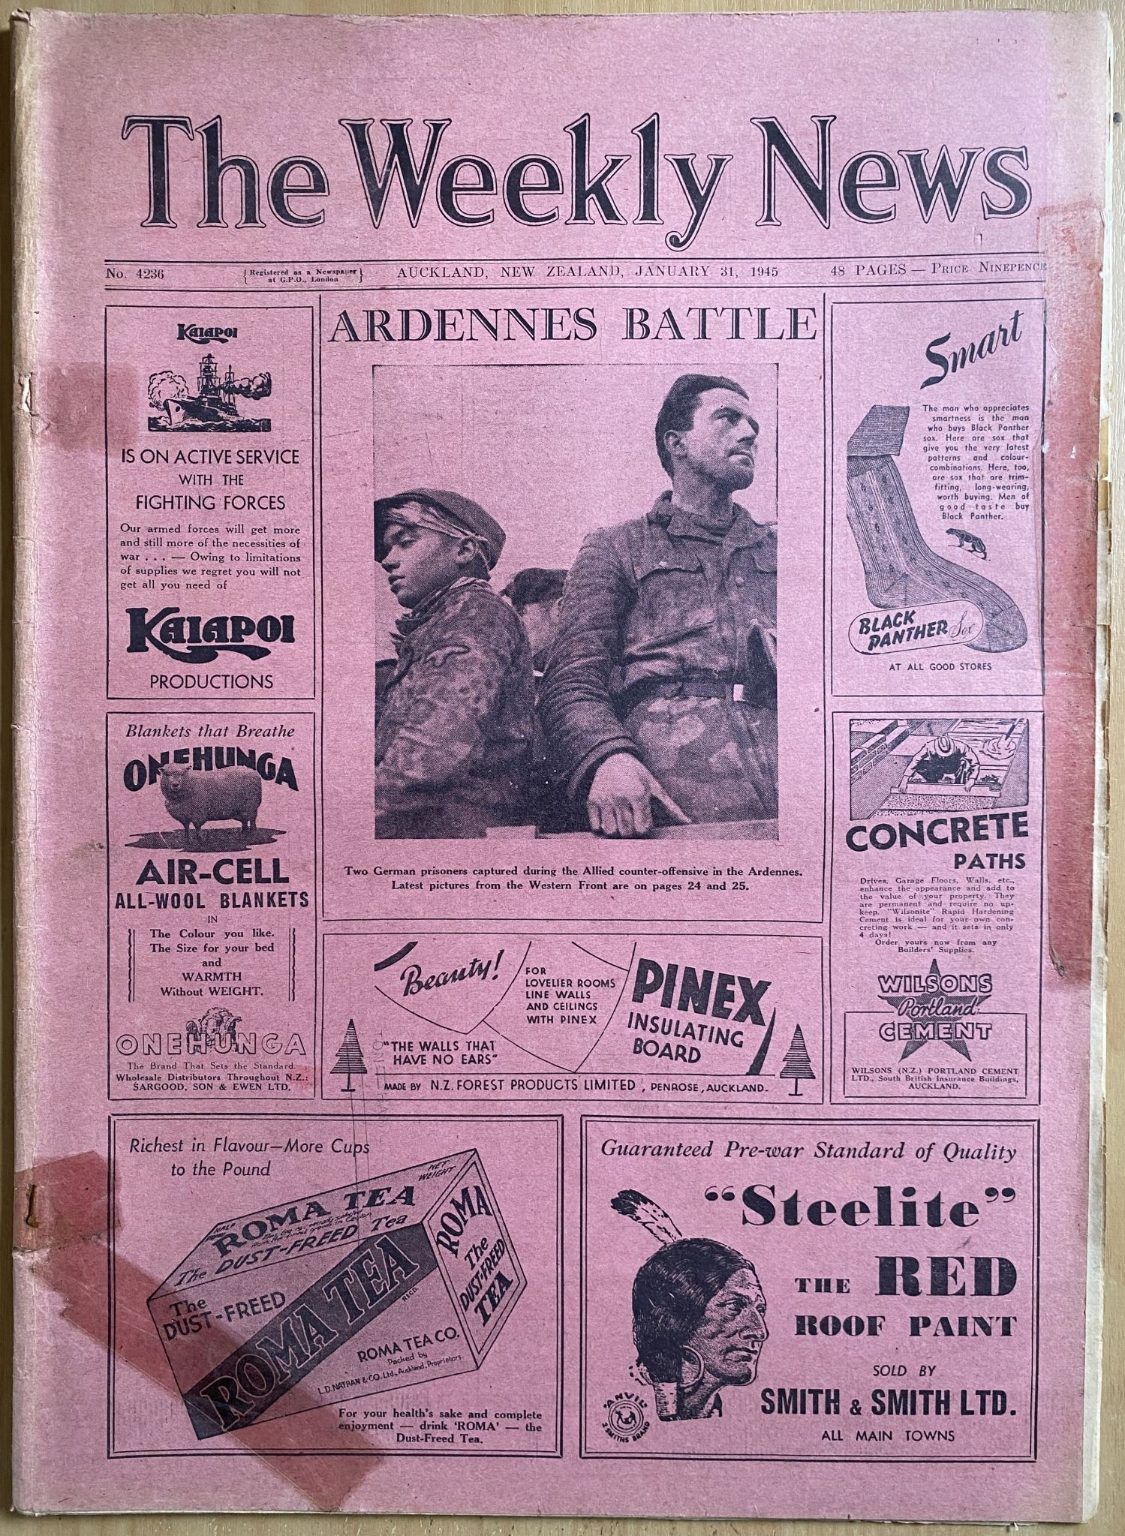 OLD NEWSPAPER: The Weekly News - No. 4236, 31 January 1945